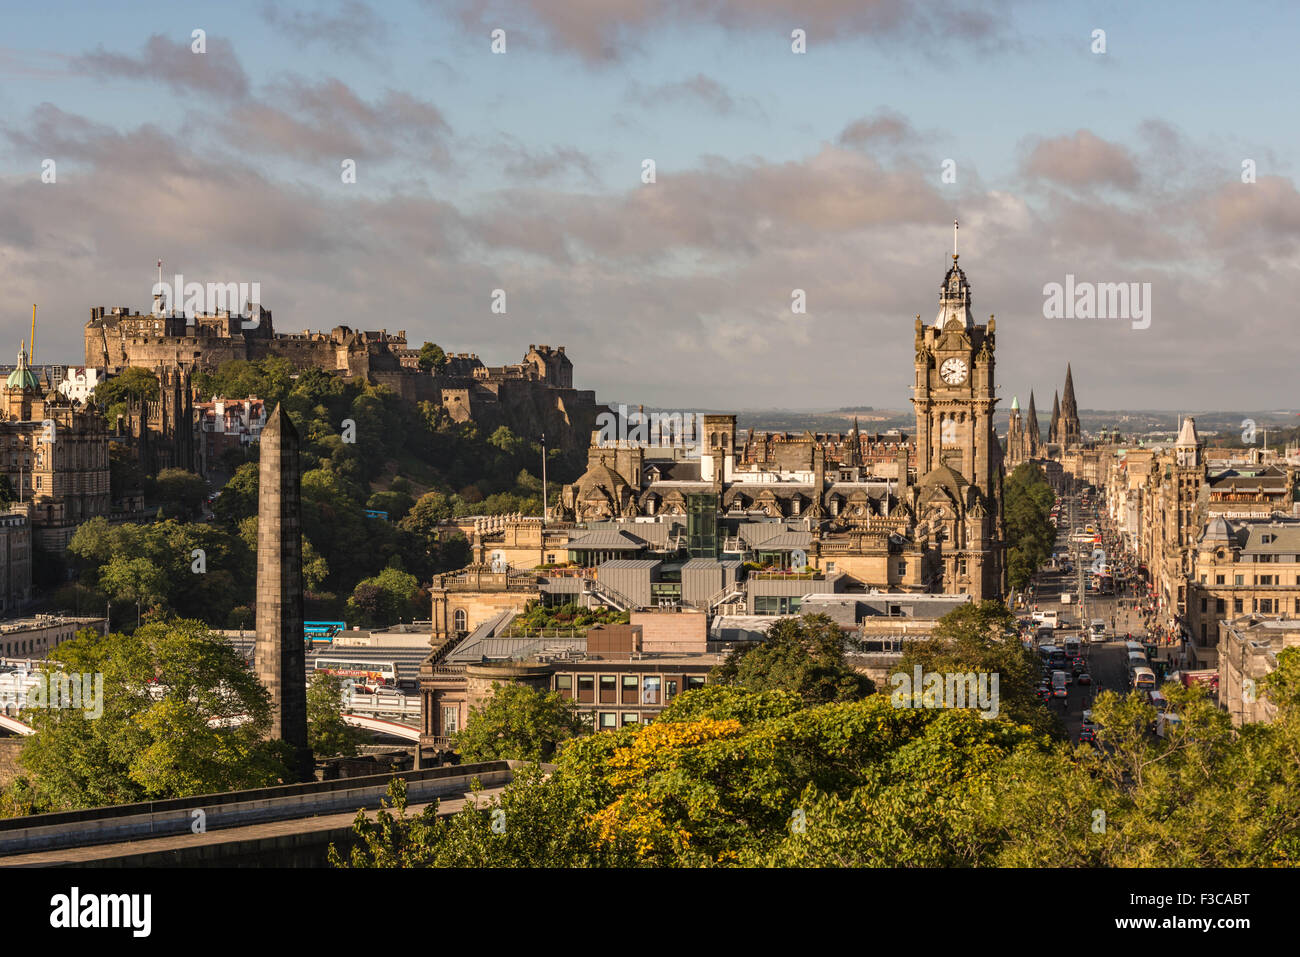 Edinburgh Skyline looking west from Calton Hill, with Edinburgh Castle on the left, the clock of the Balmoral Hotel and Princes Street, on the right Stock Photo